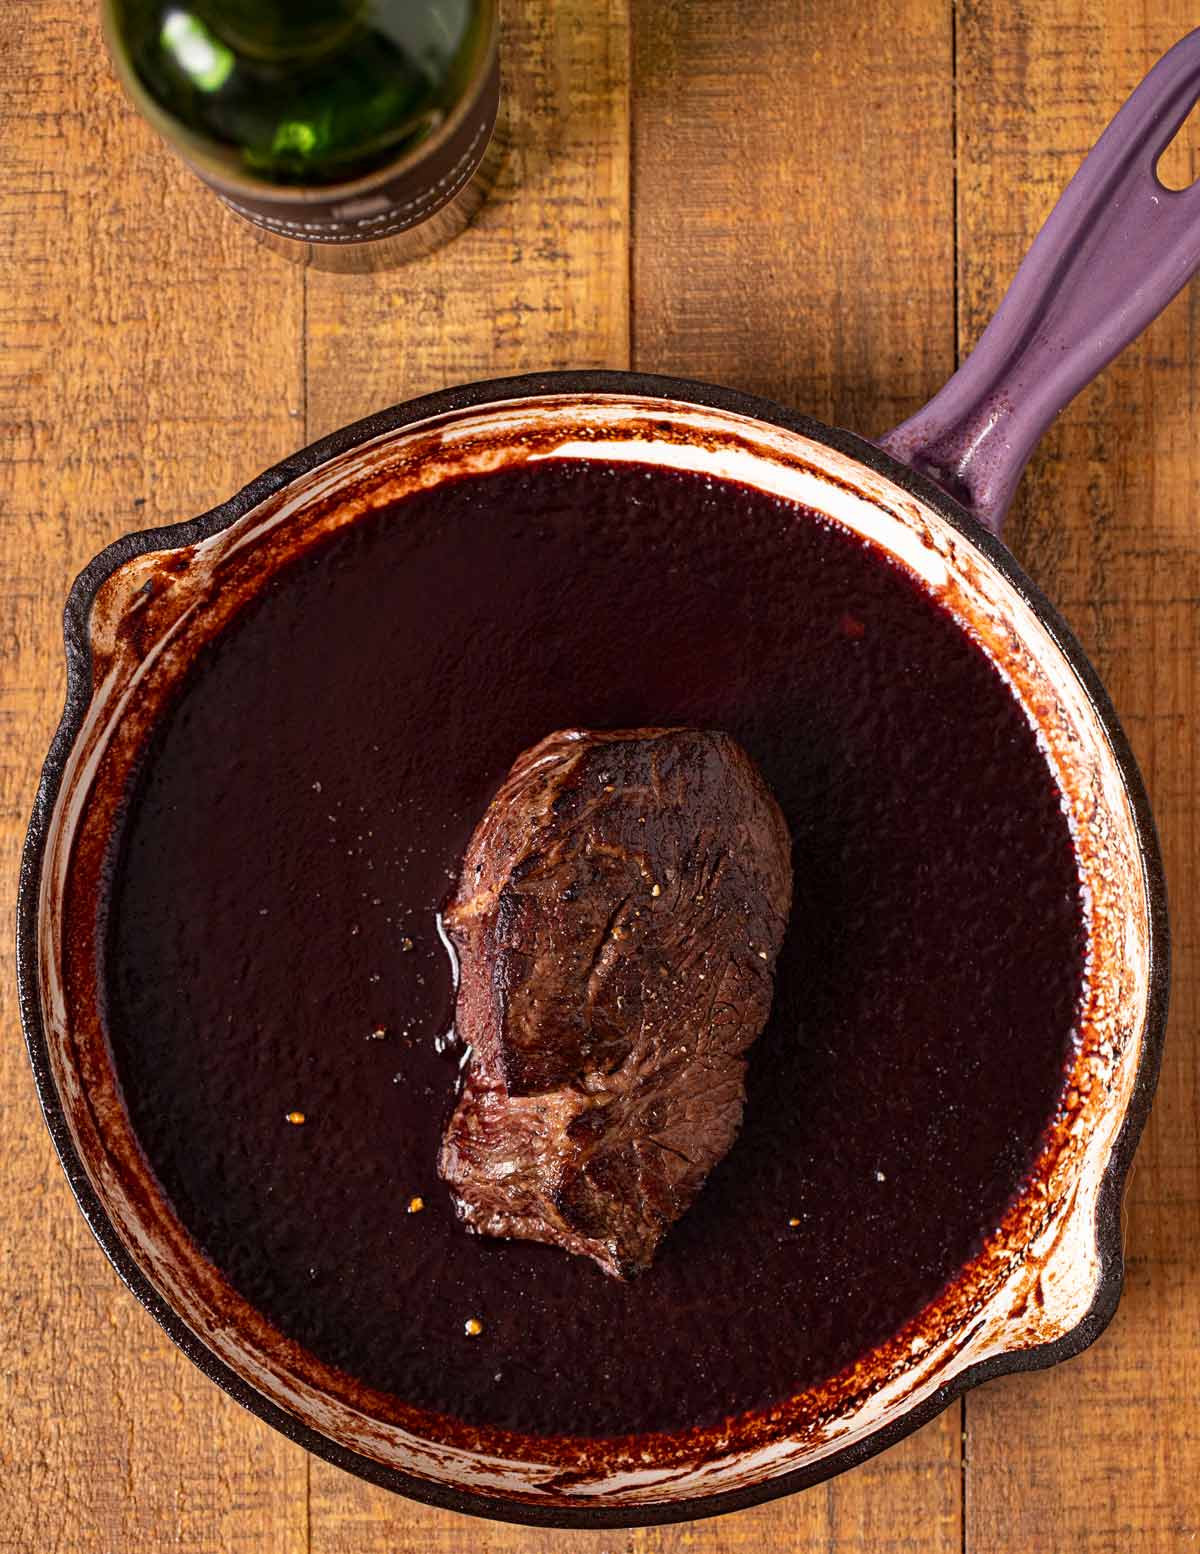 Bordelaise Sauce after reduction with filet